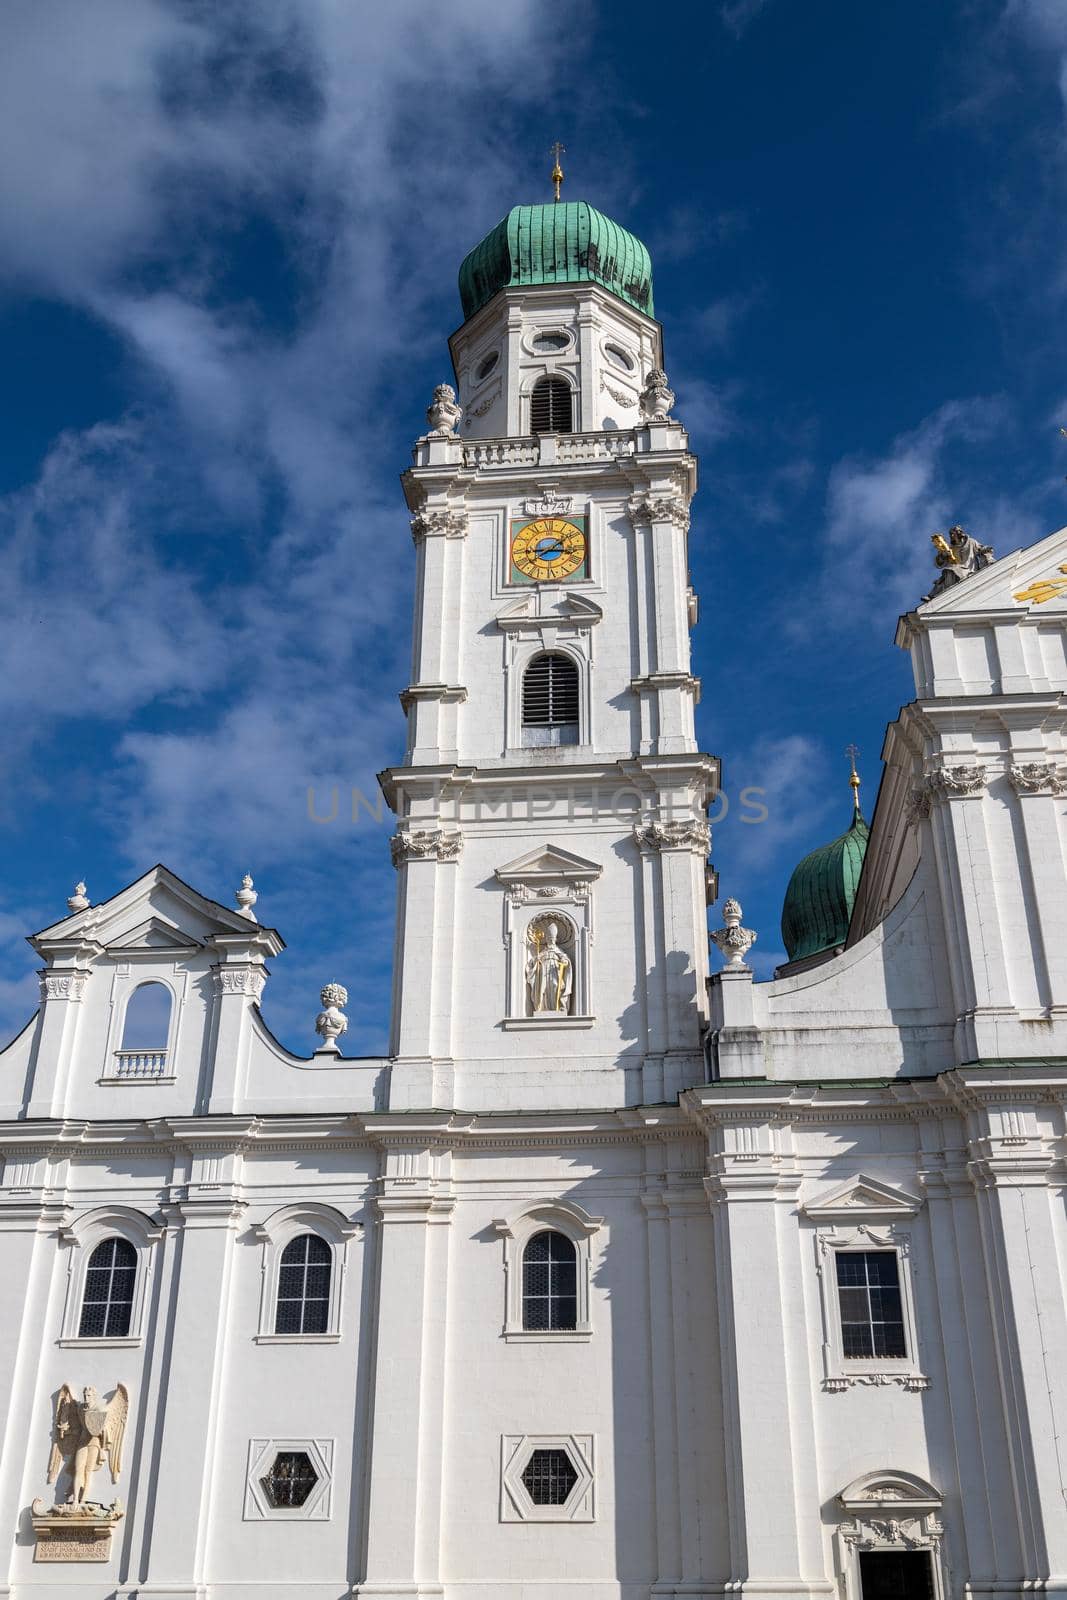 View at St. Stephen's Cathedral (Dom St. Stephan) in Passau, Bavaria, Germany by reinerc